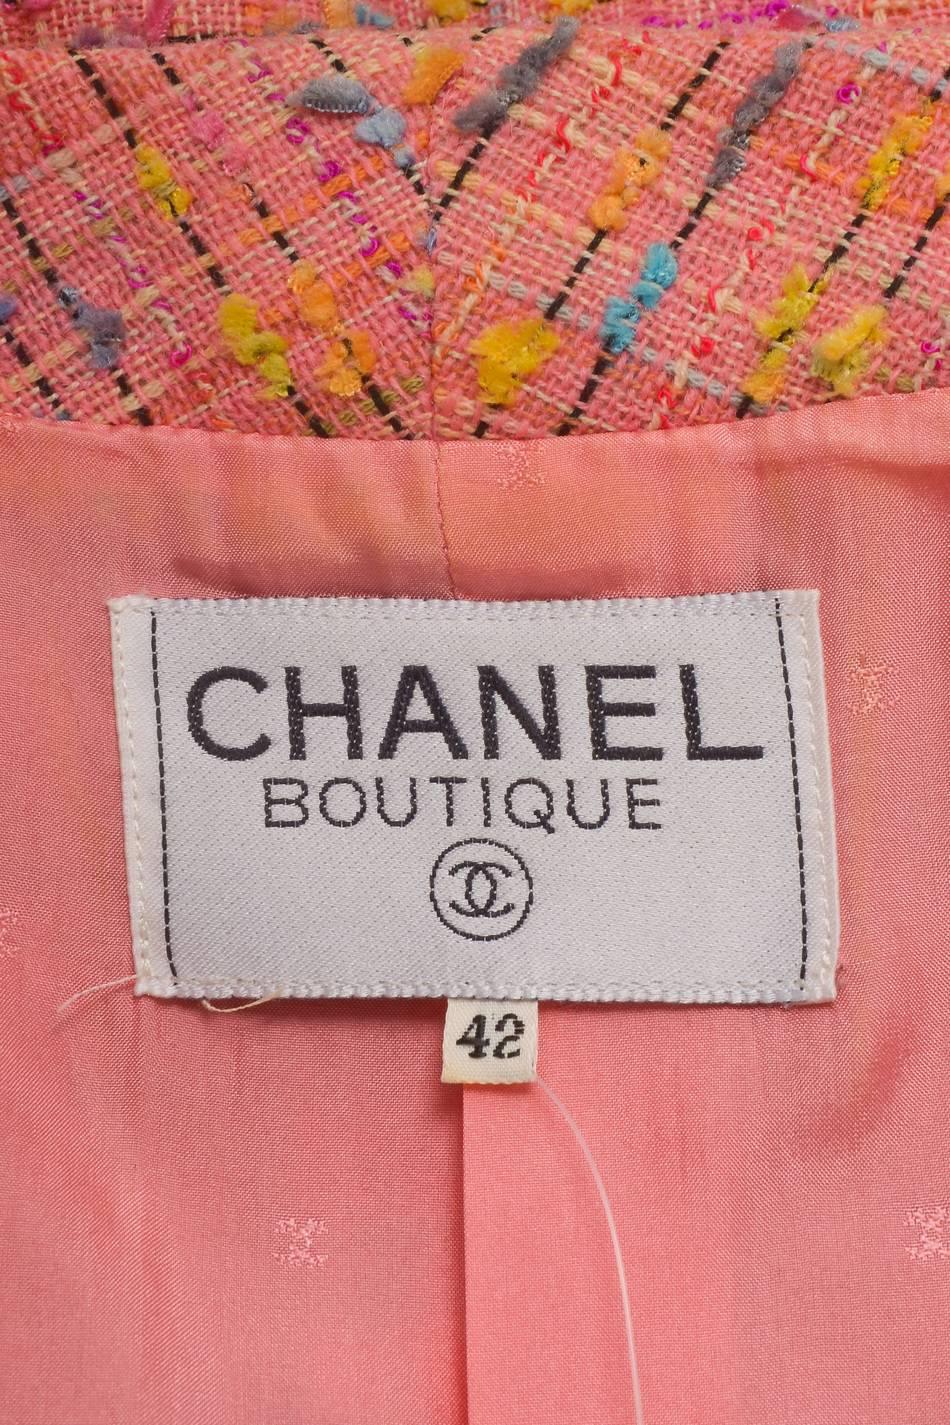 Vintage Chanel Boutique Pink Multicolor Longline Nubby Tweed LS Jacket SZ 42 In Good Condition For Sale In Chicago, IL